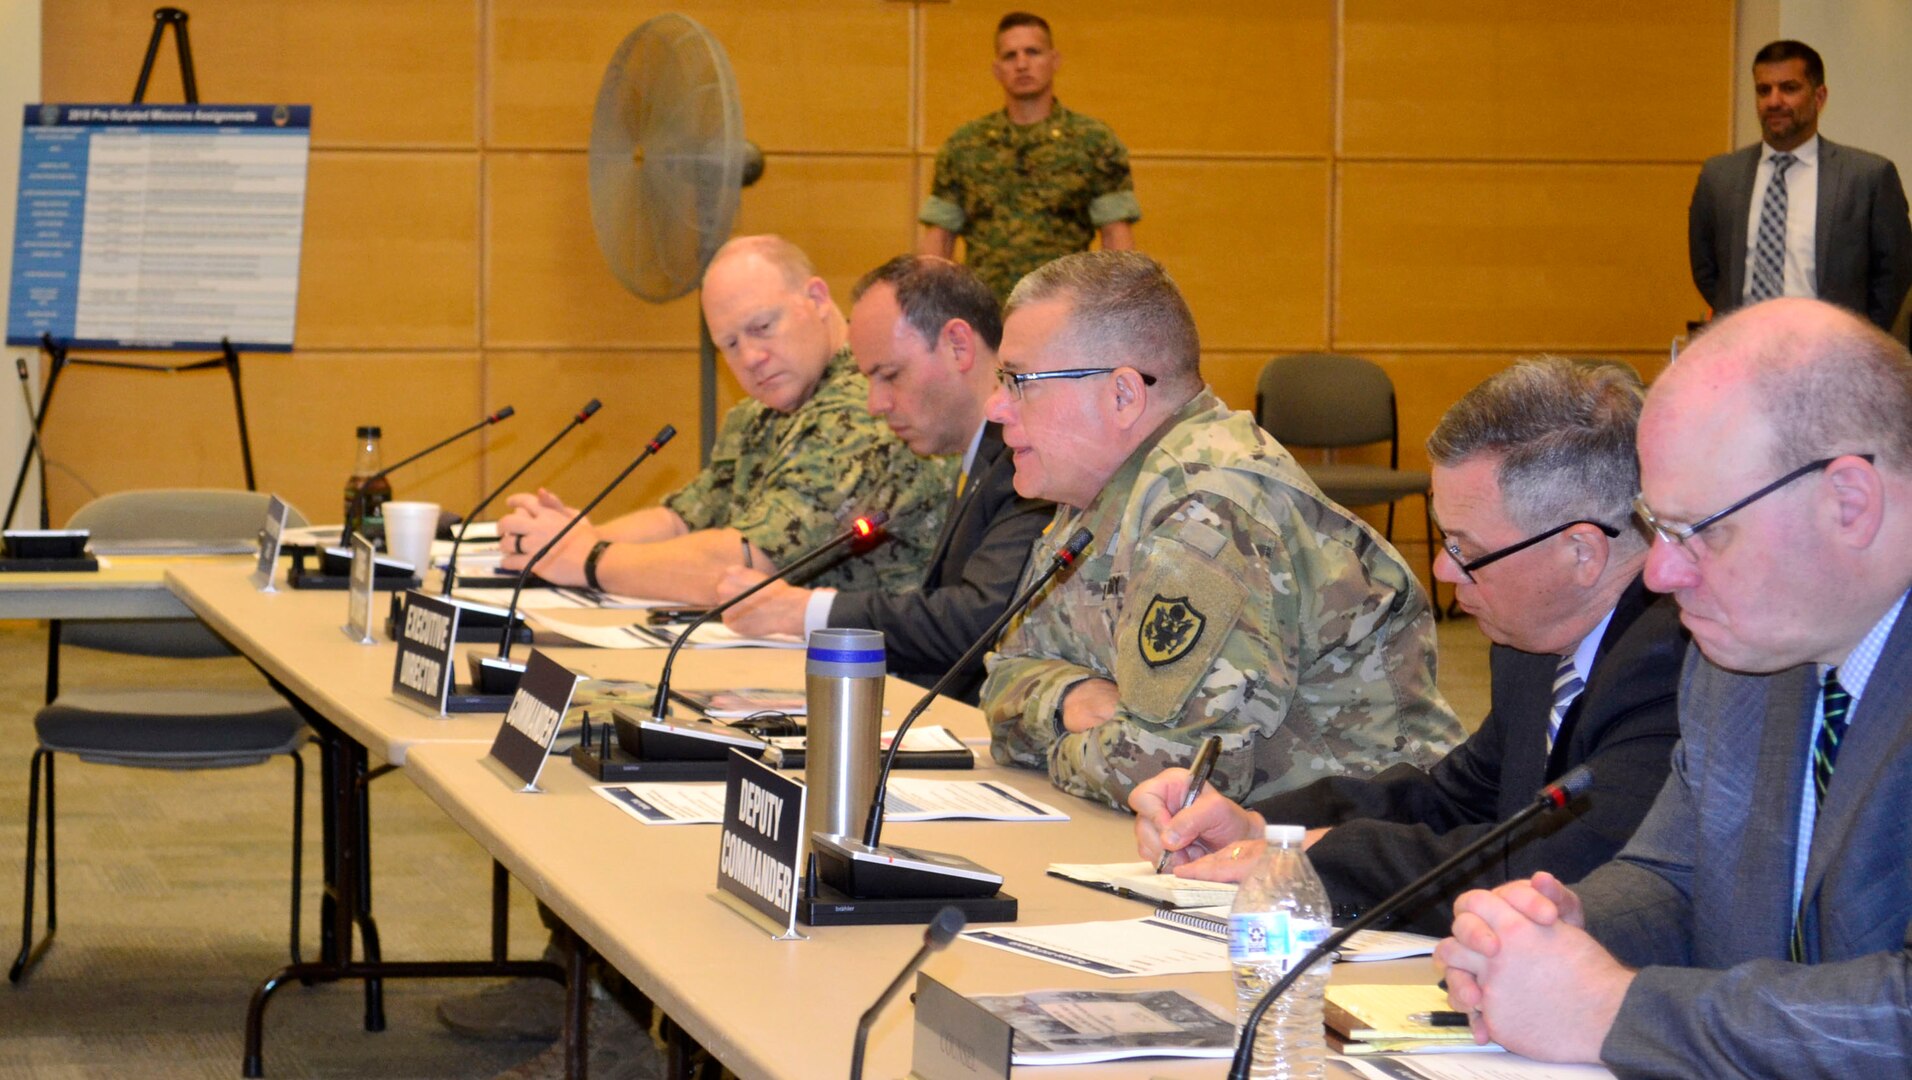 Army Brig. Gen. Mark Simerly, DLA Troop Support Commander, center, speaks to participants during an exercise at DLA Troop Support May 28, 2019 in Philadelphia.